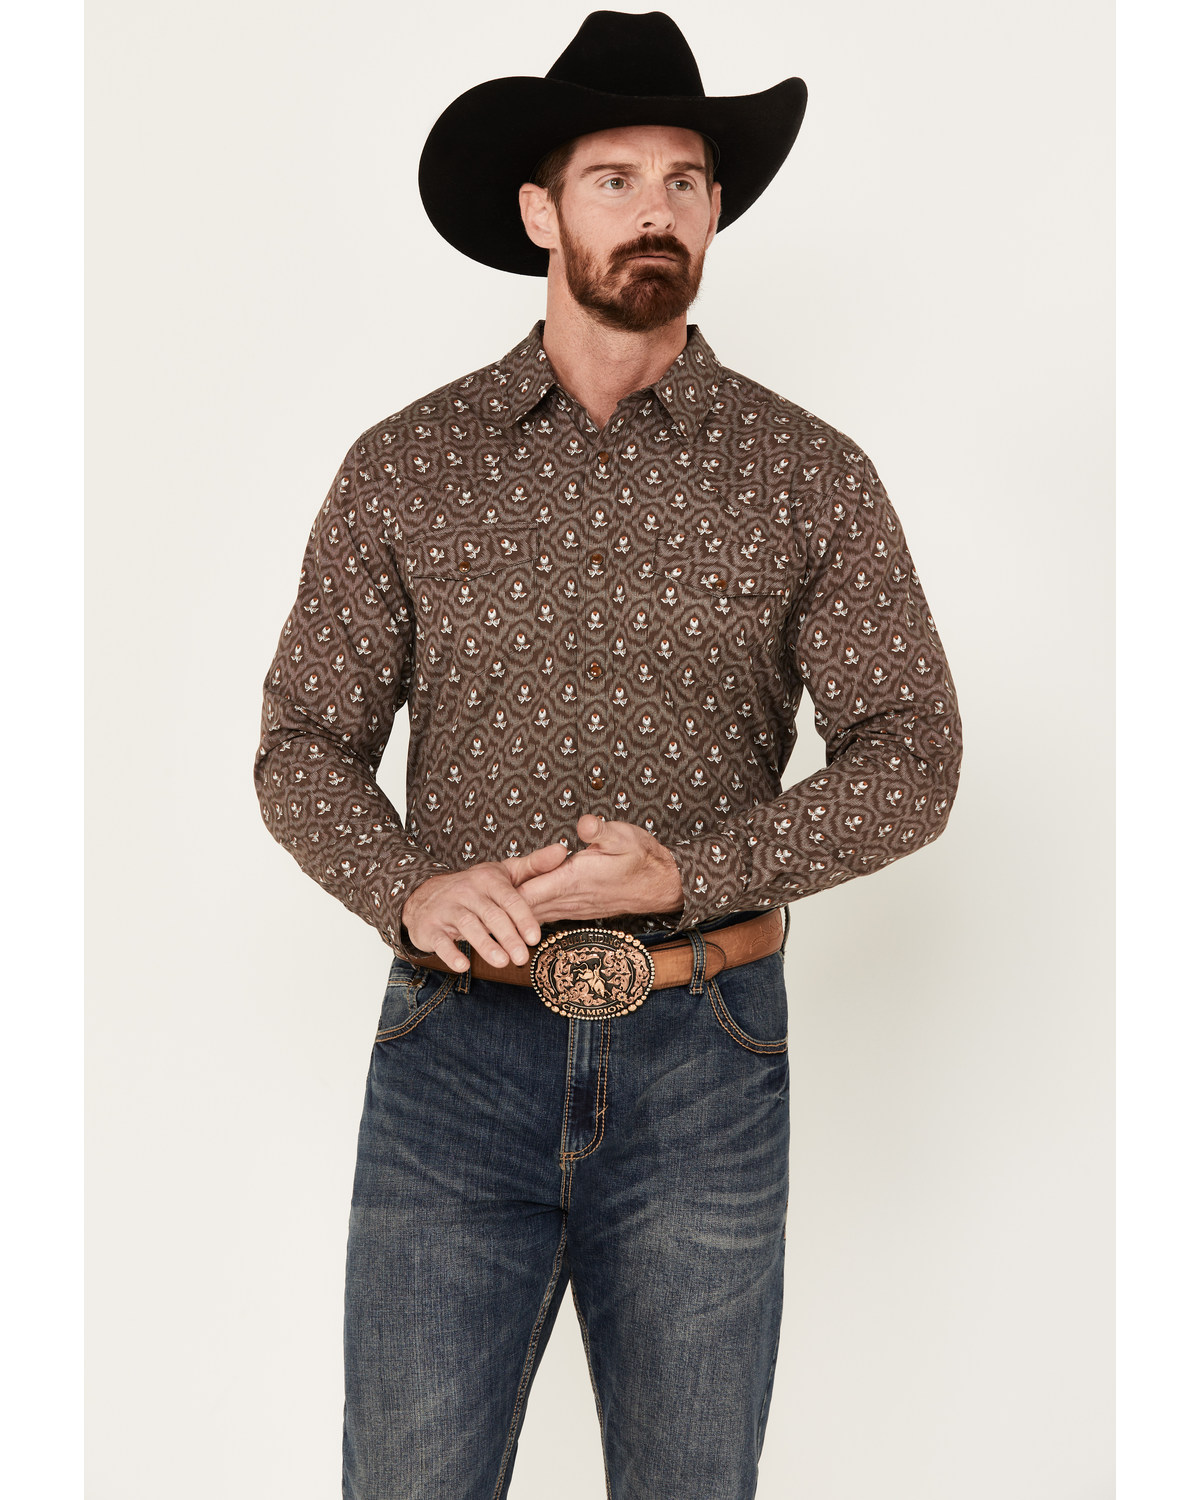 Gibson Trading Co. Men's Barbed Wire Floral Print Long Sleeve Snap Western Shirt